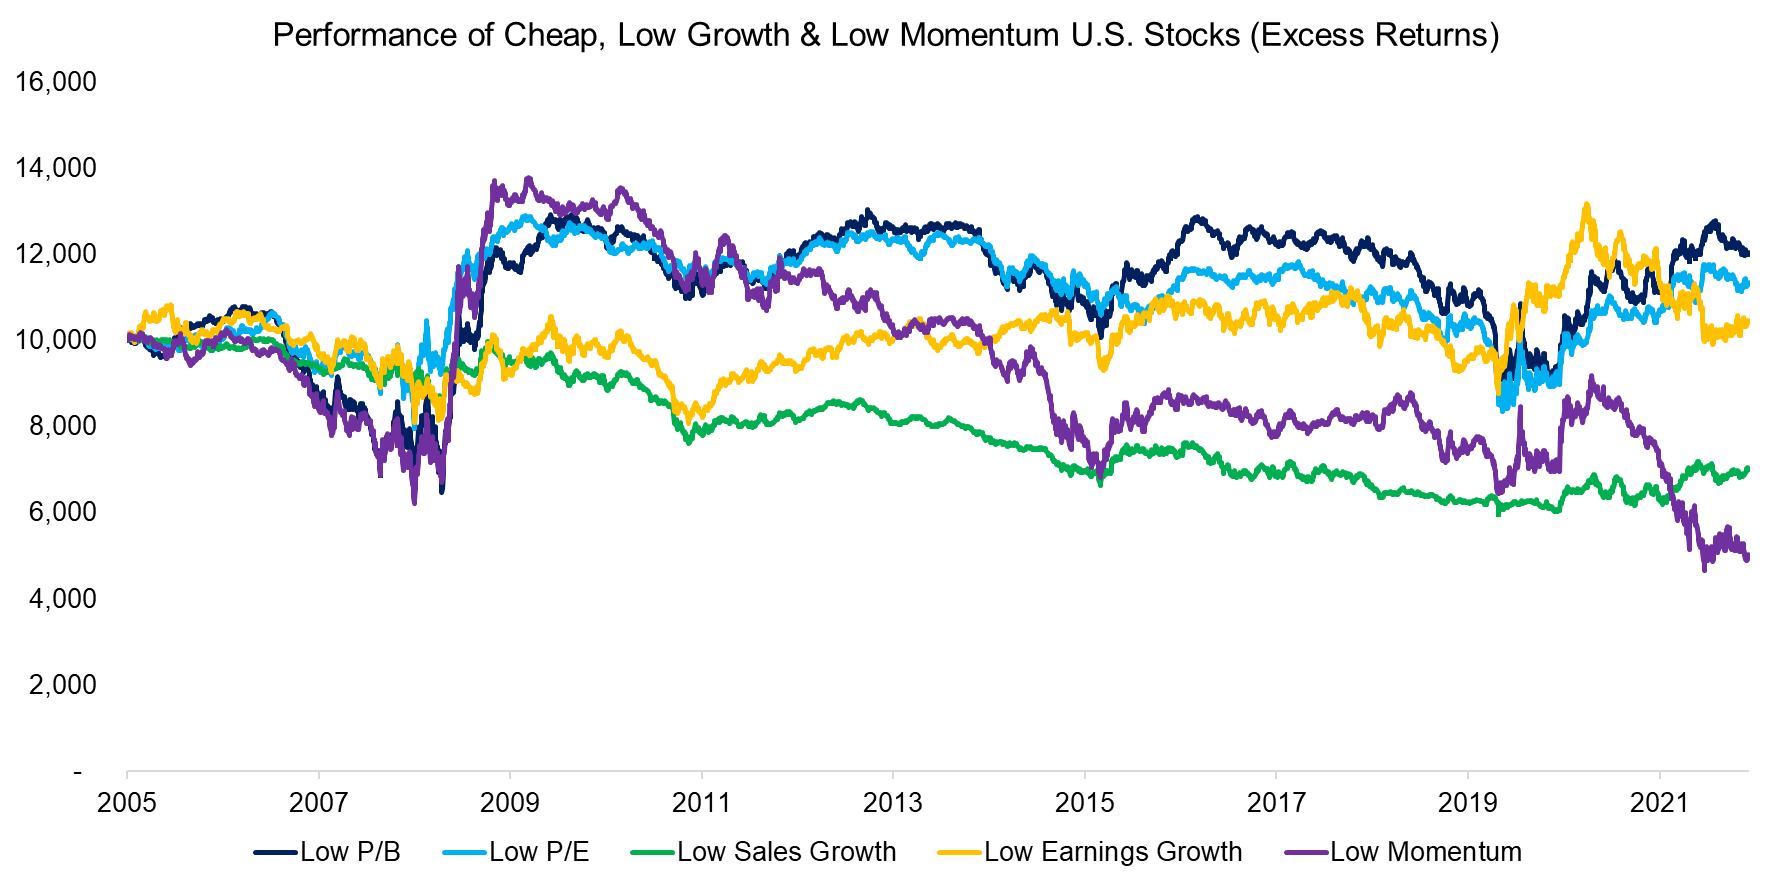 Performance of Cheap, Low Growth & Low Momentum U.S. Stocks (Excess Returns)